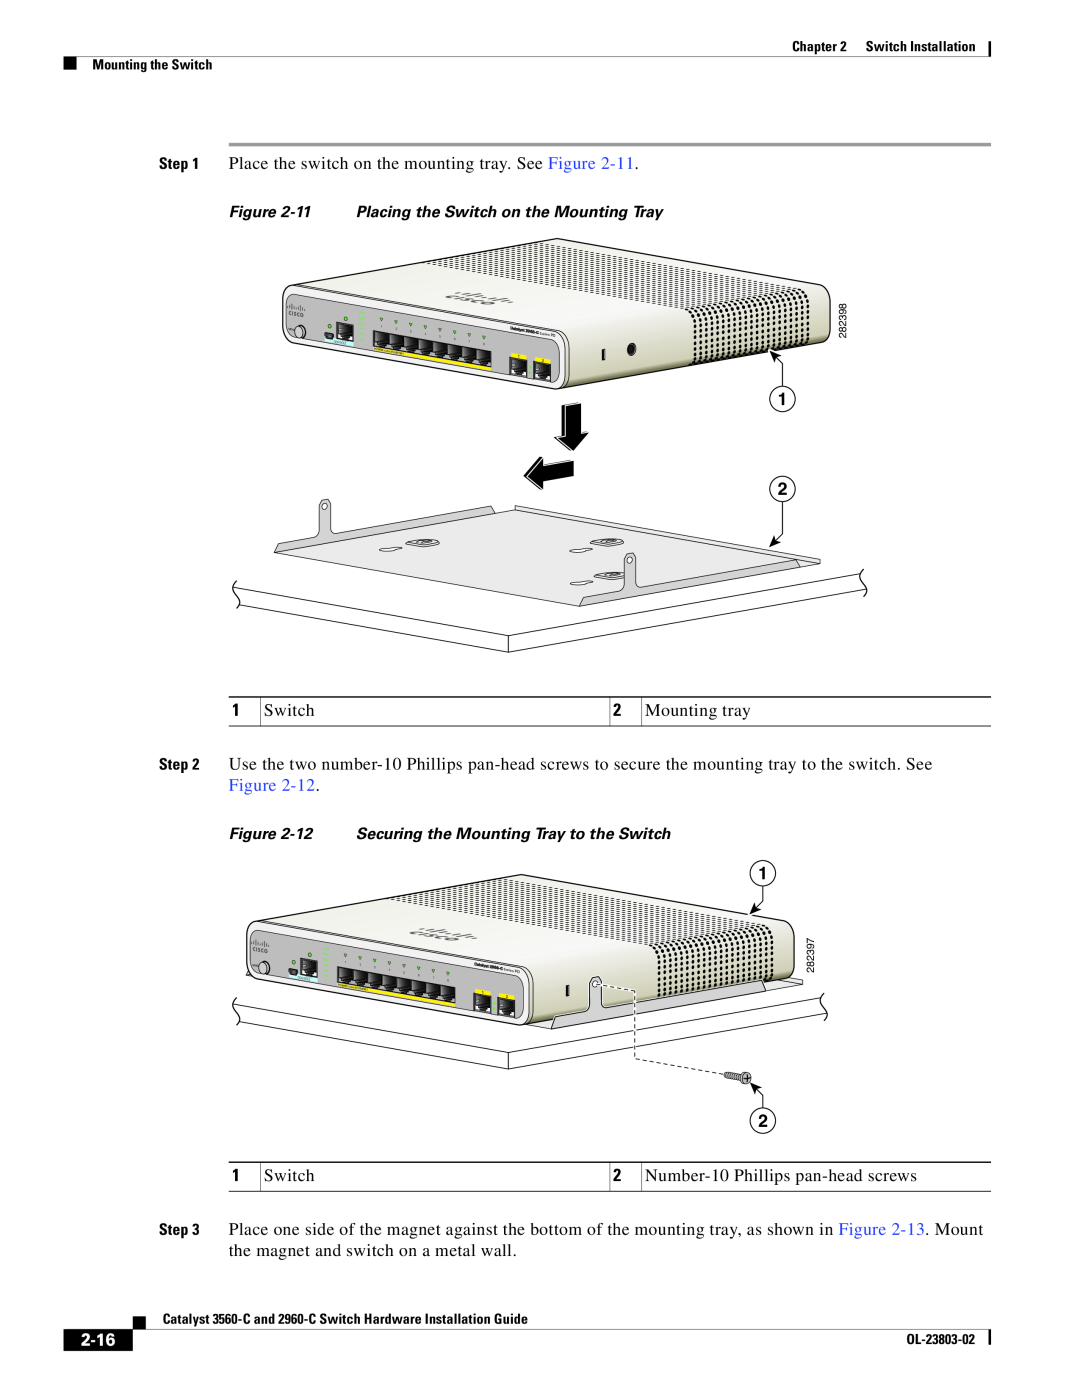 Cisco Systems N55M4Q manual 2-16, 11 Placing the Switch on the Mounting Tray, 12 Securing the Mounting Tray to the Switch 